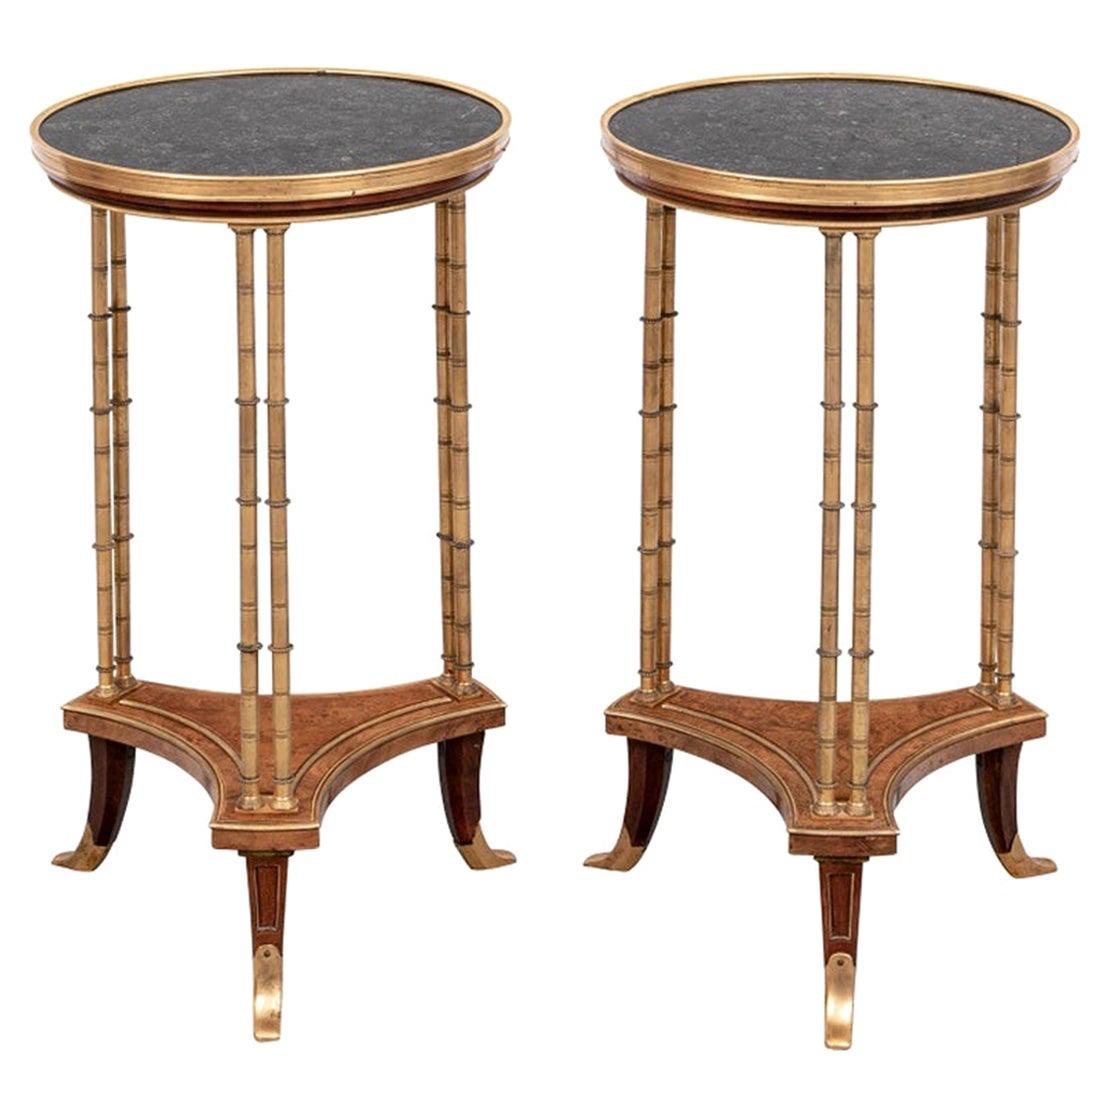 Very Fine Pair Marble Top Gilt Bronze Gueridons after Adam Weiswiler For Sale